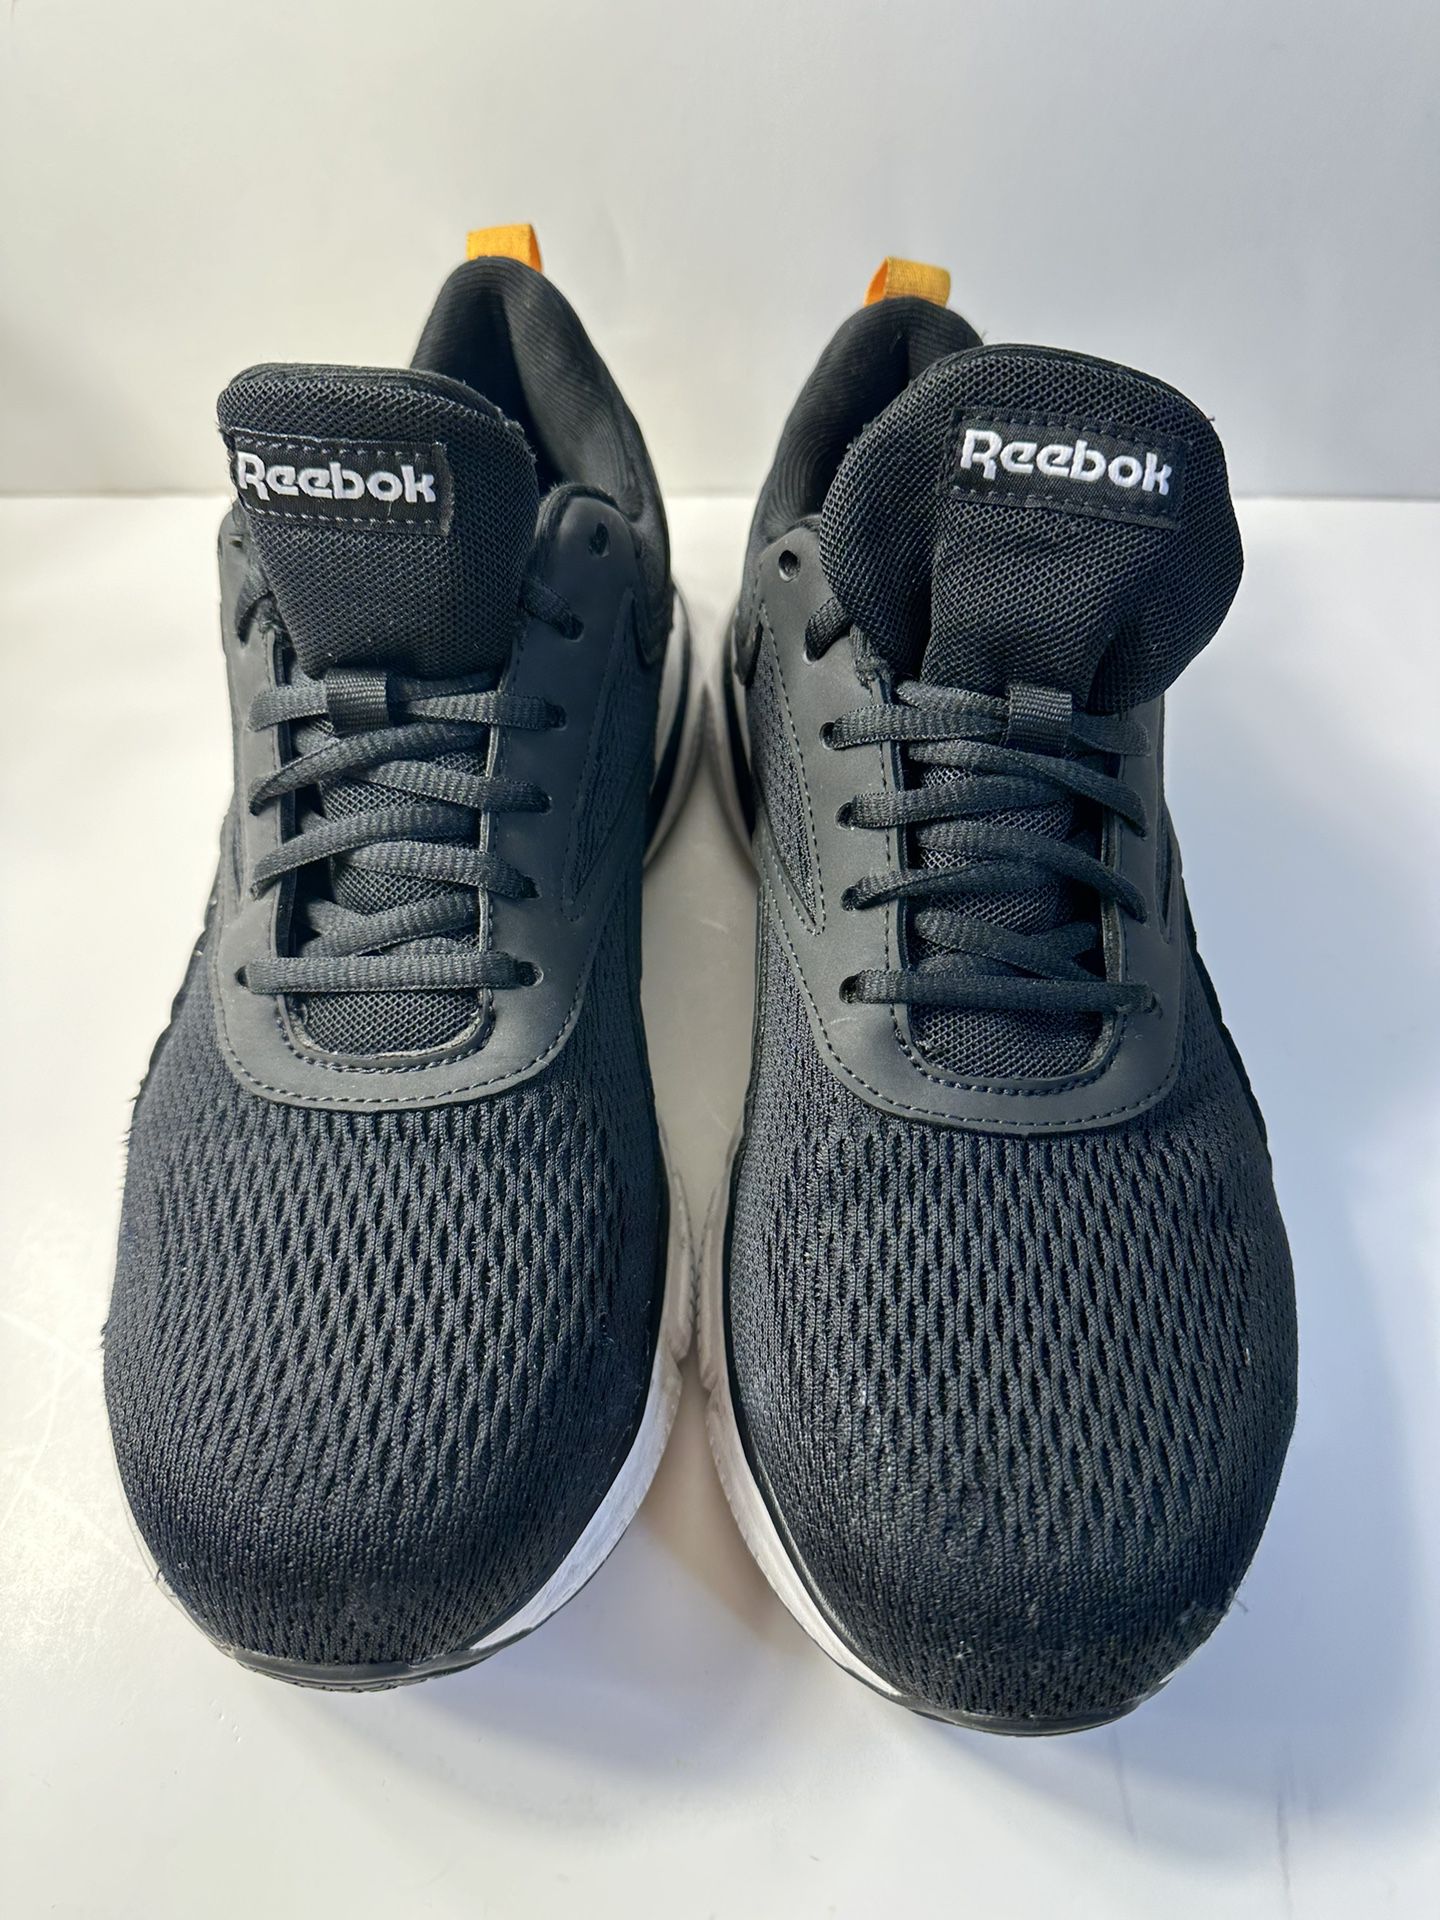 Reebok Womens Work N Comfort 2 Black Safety Shoes Size 10